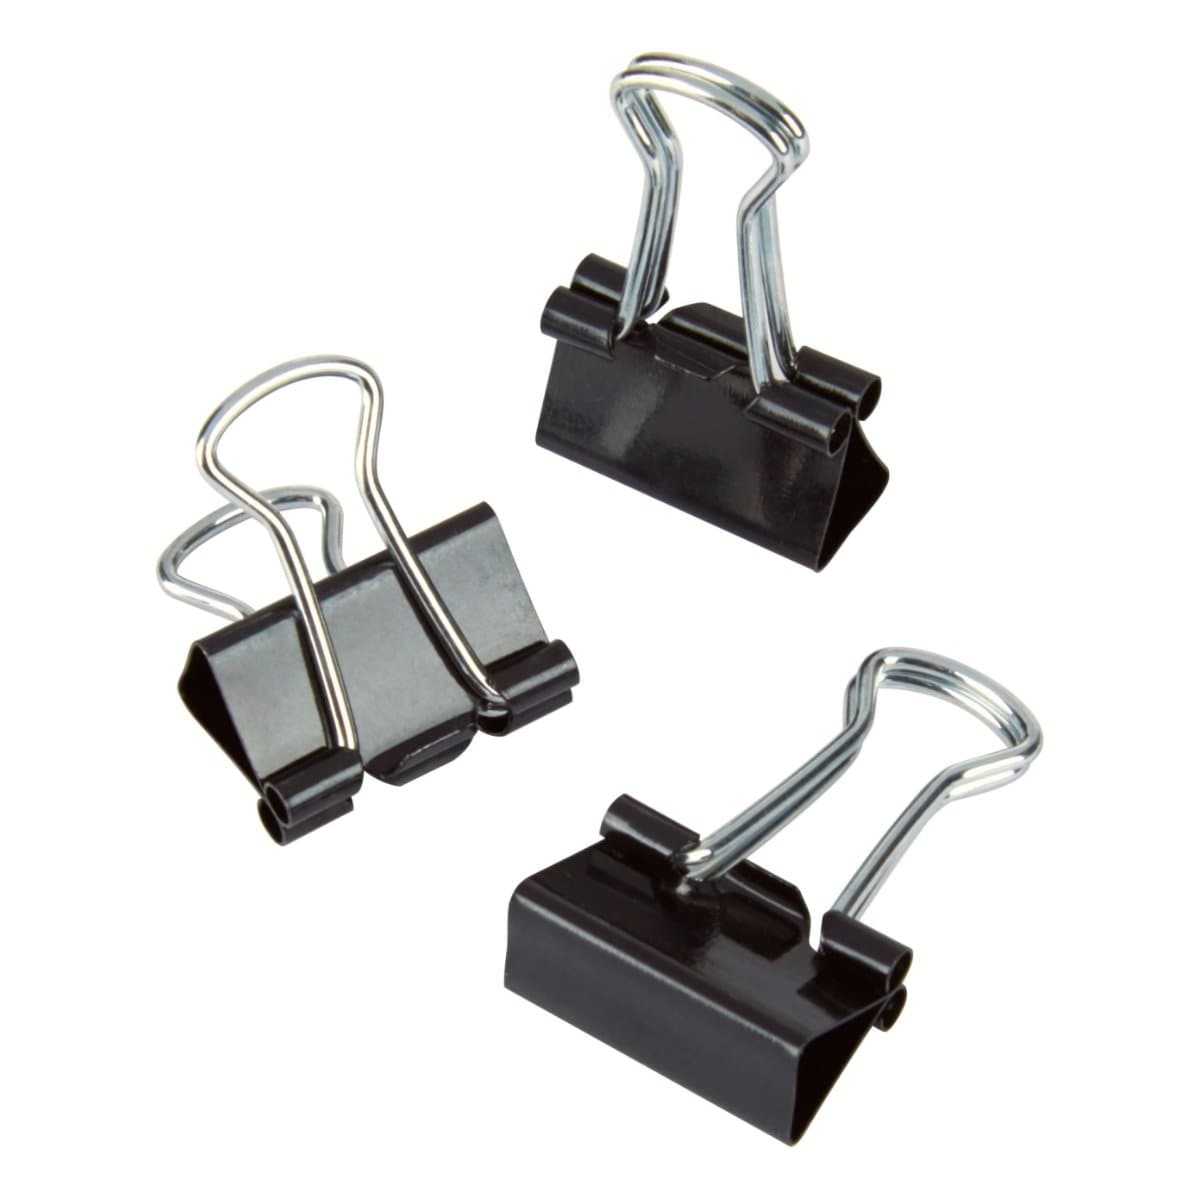 Deluxe Binder Clips, 15mm, 12/pack, Black - Office Supplies